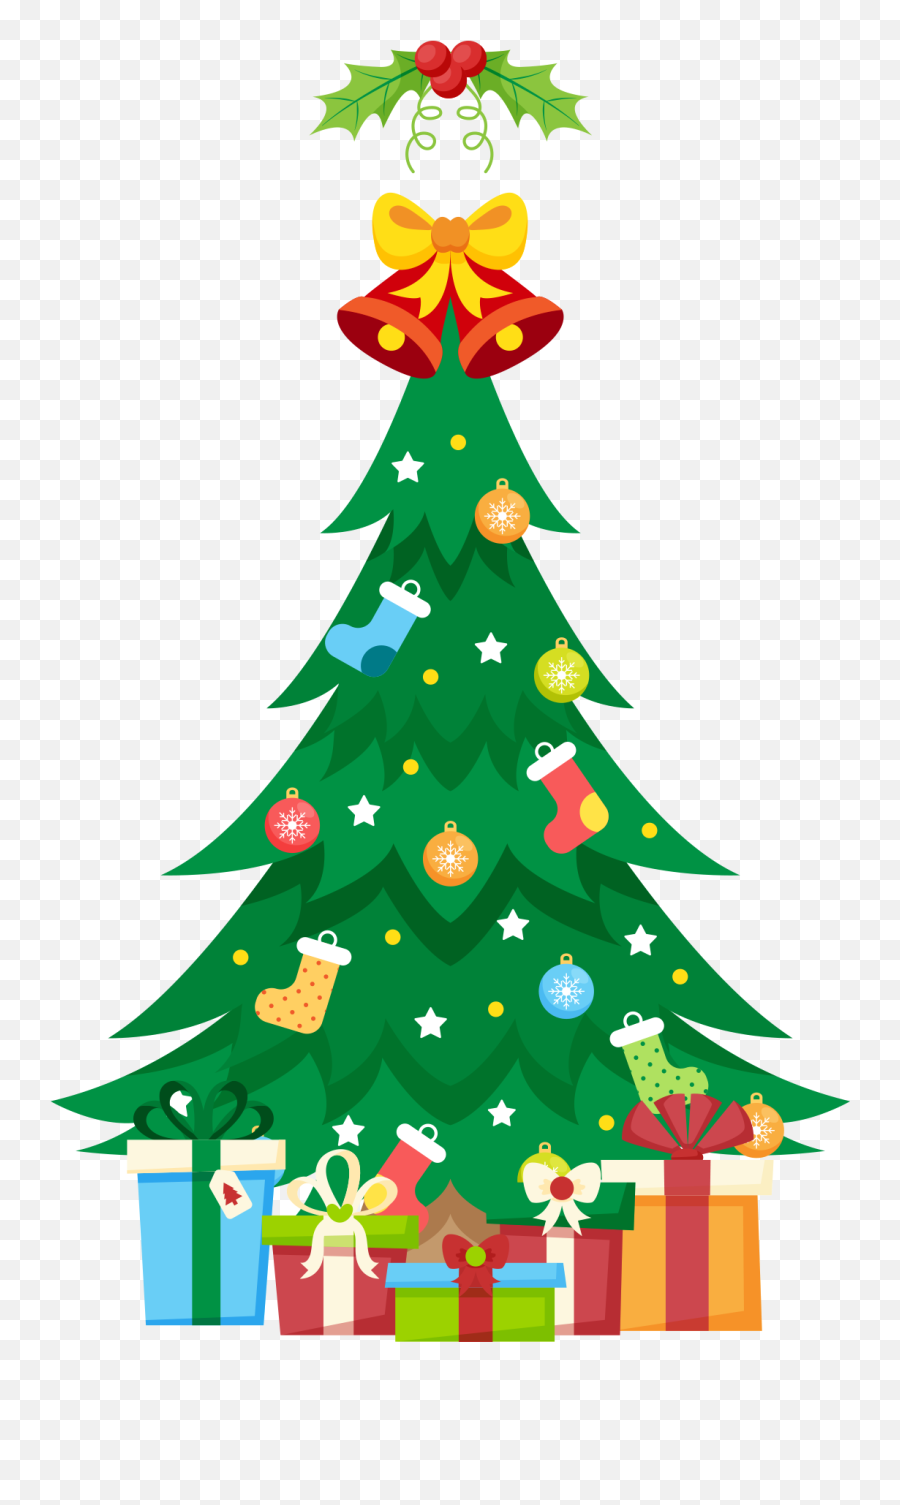 Traditional Christmas Tree With Gifts - Christmas Tree With More Gifts Clipart Emoji,Gifts Clipart